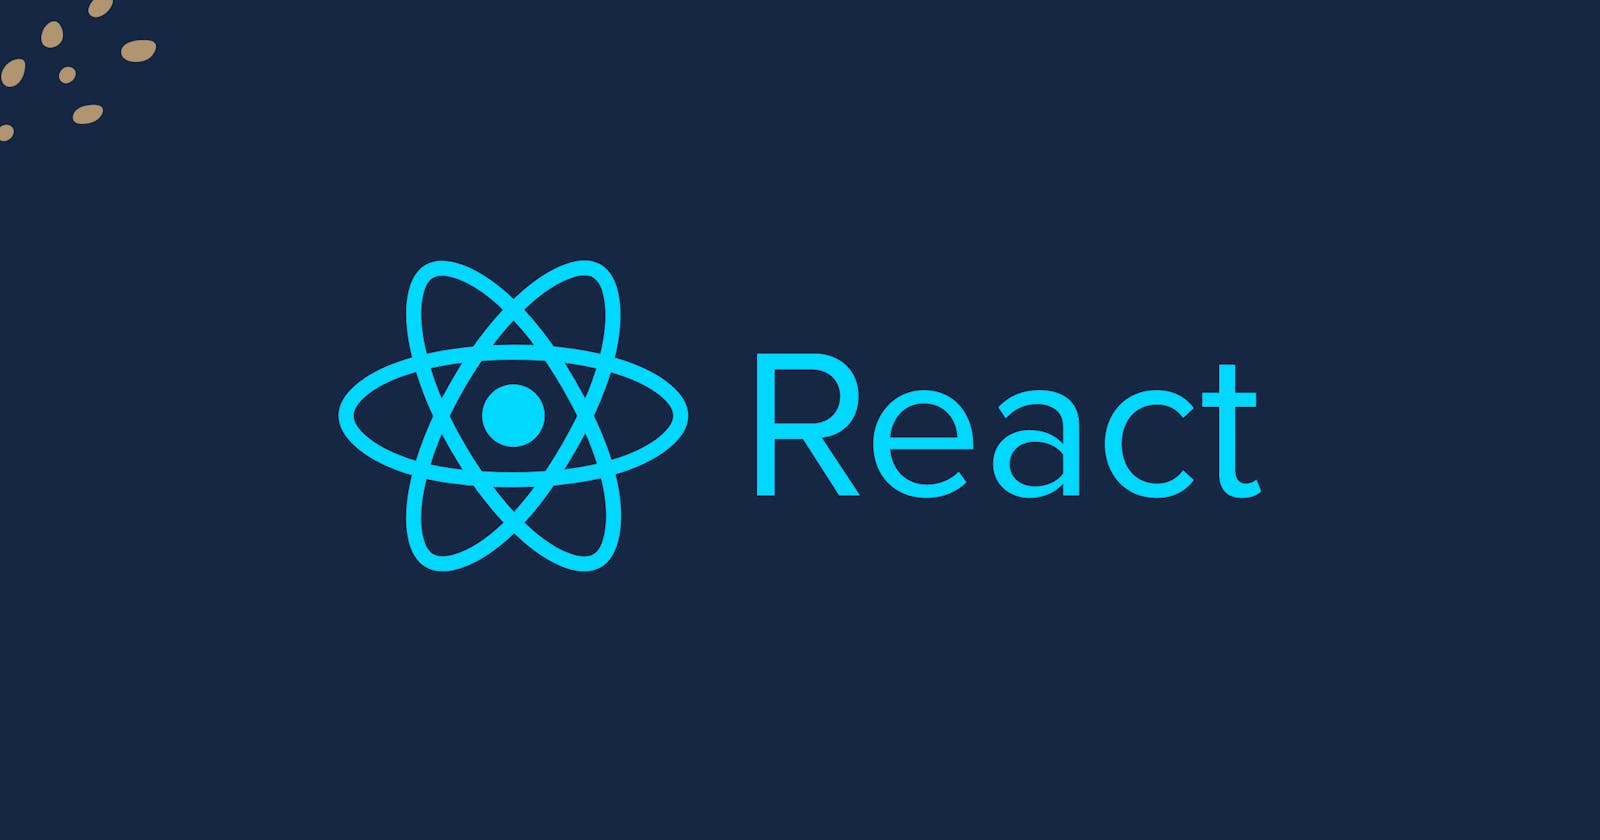 You Don't Need To Learn ReactJS Now